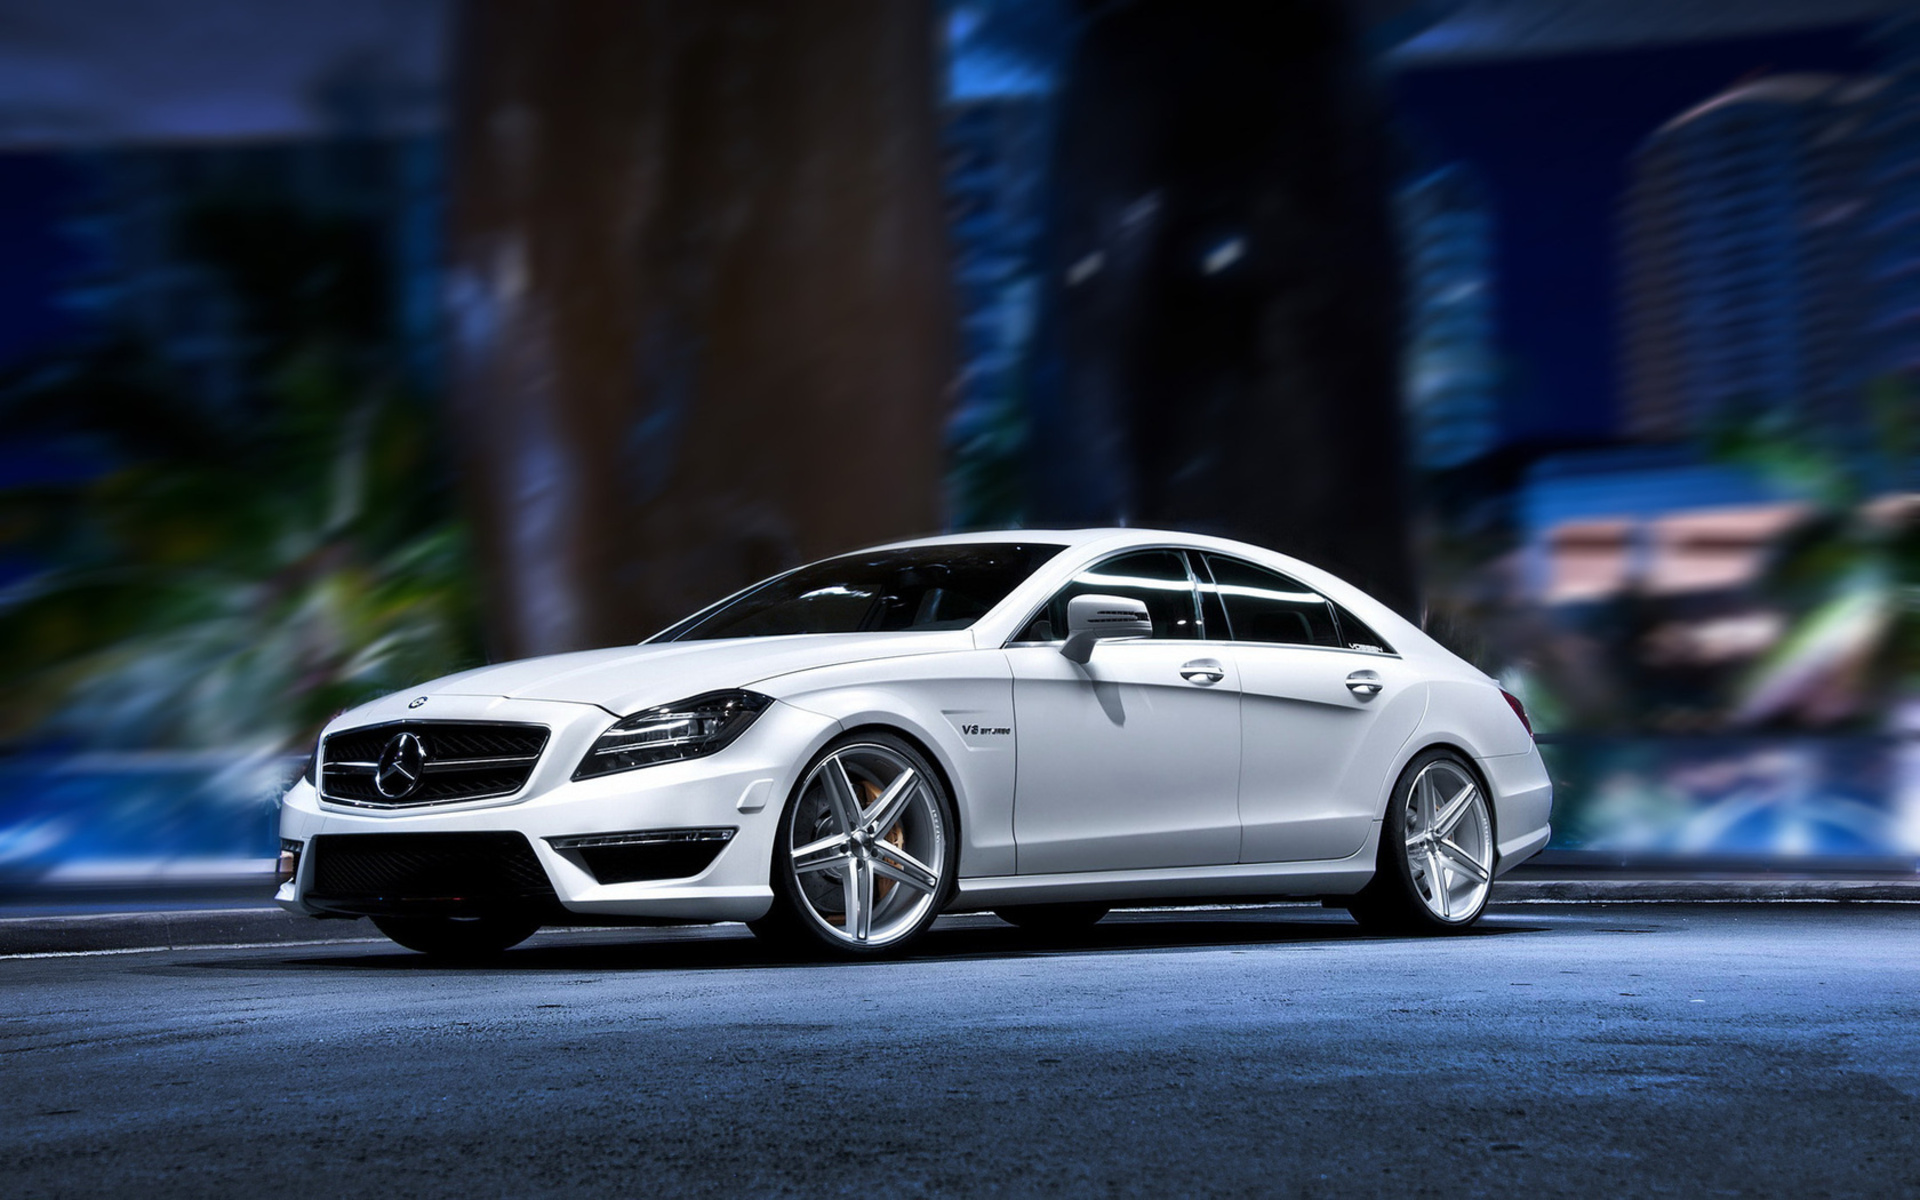 Mercedes HD Wallpaper | Background Image | 1920x1200 | ID:275043 - Wallpaper Abyss